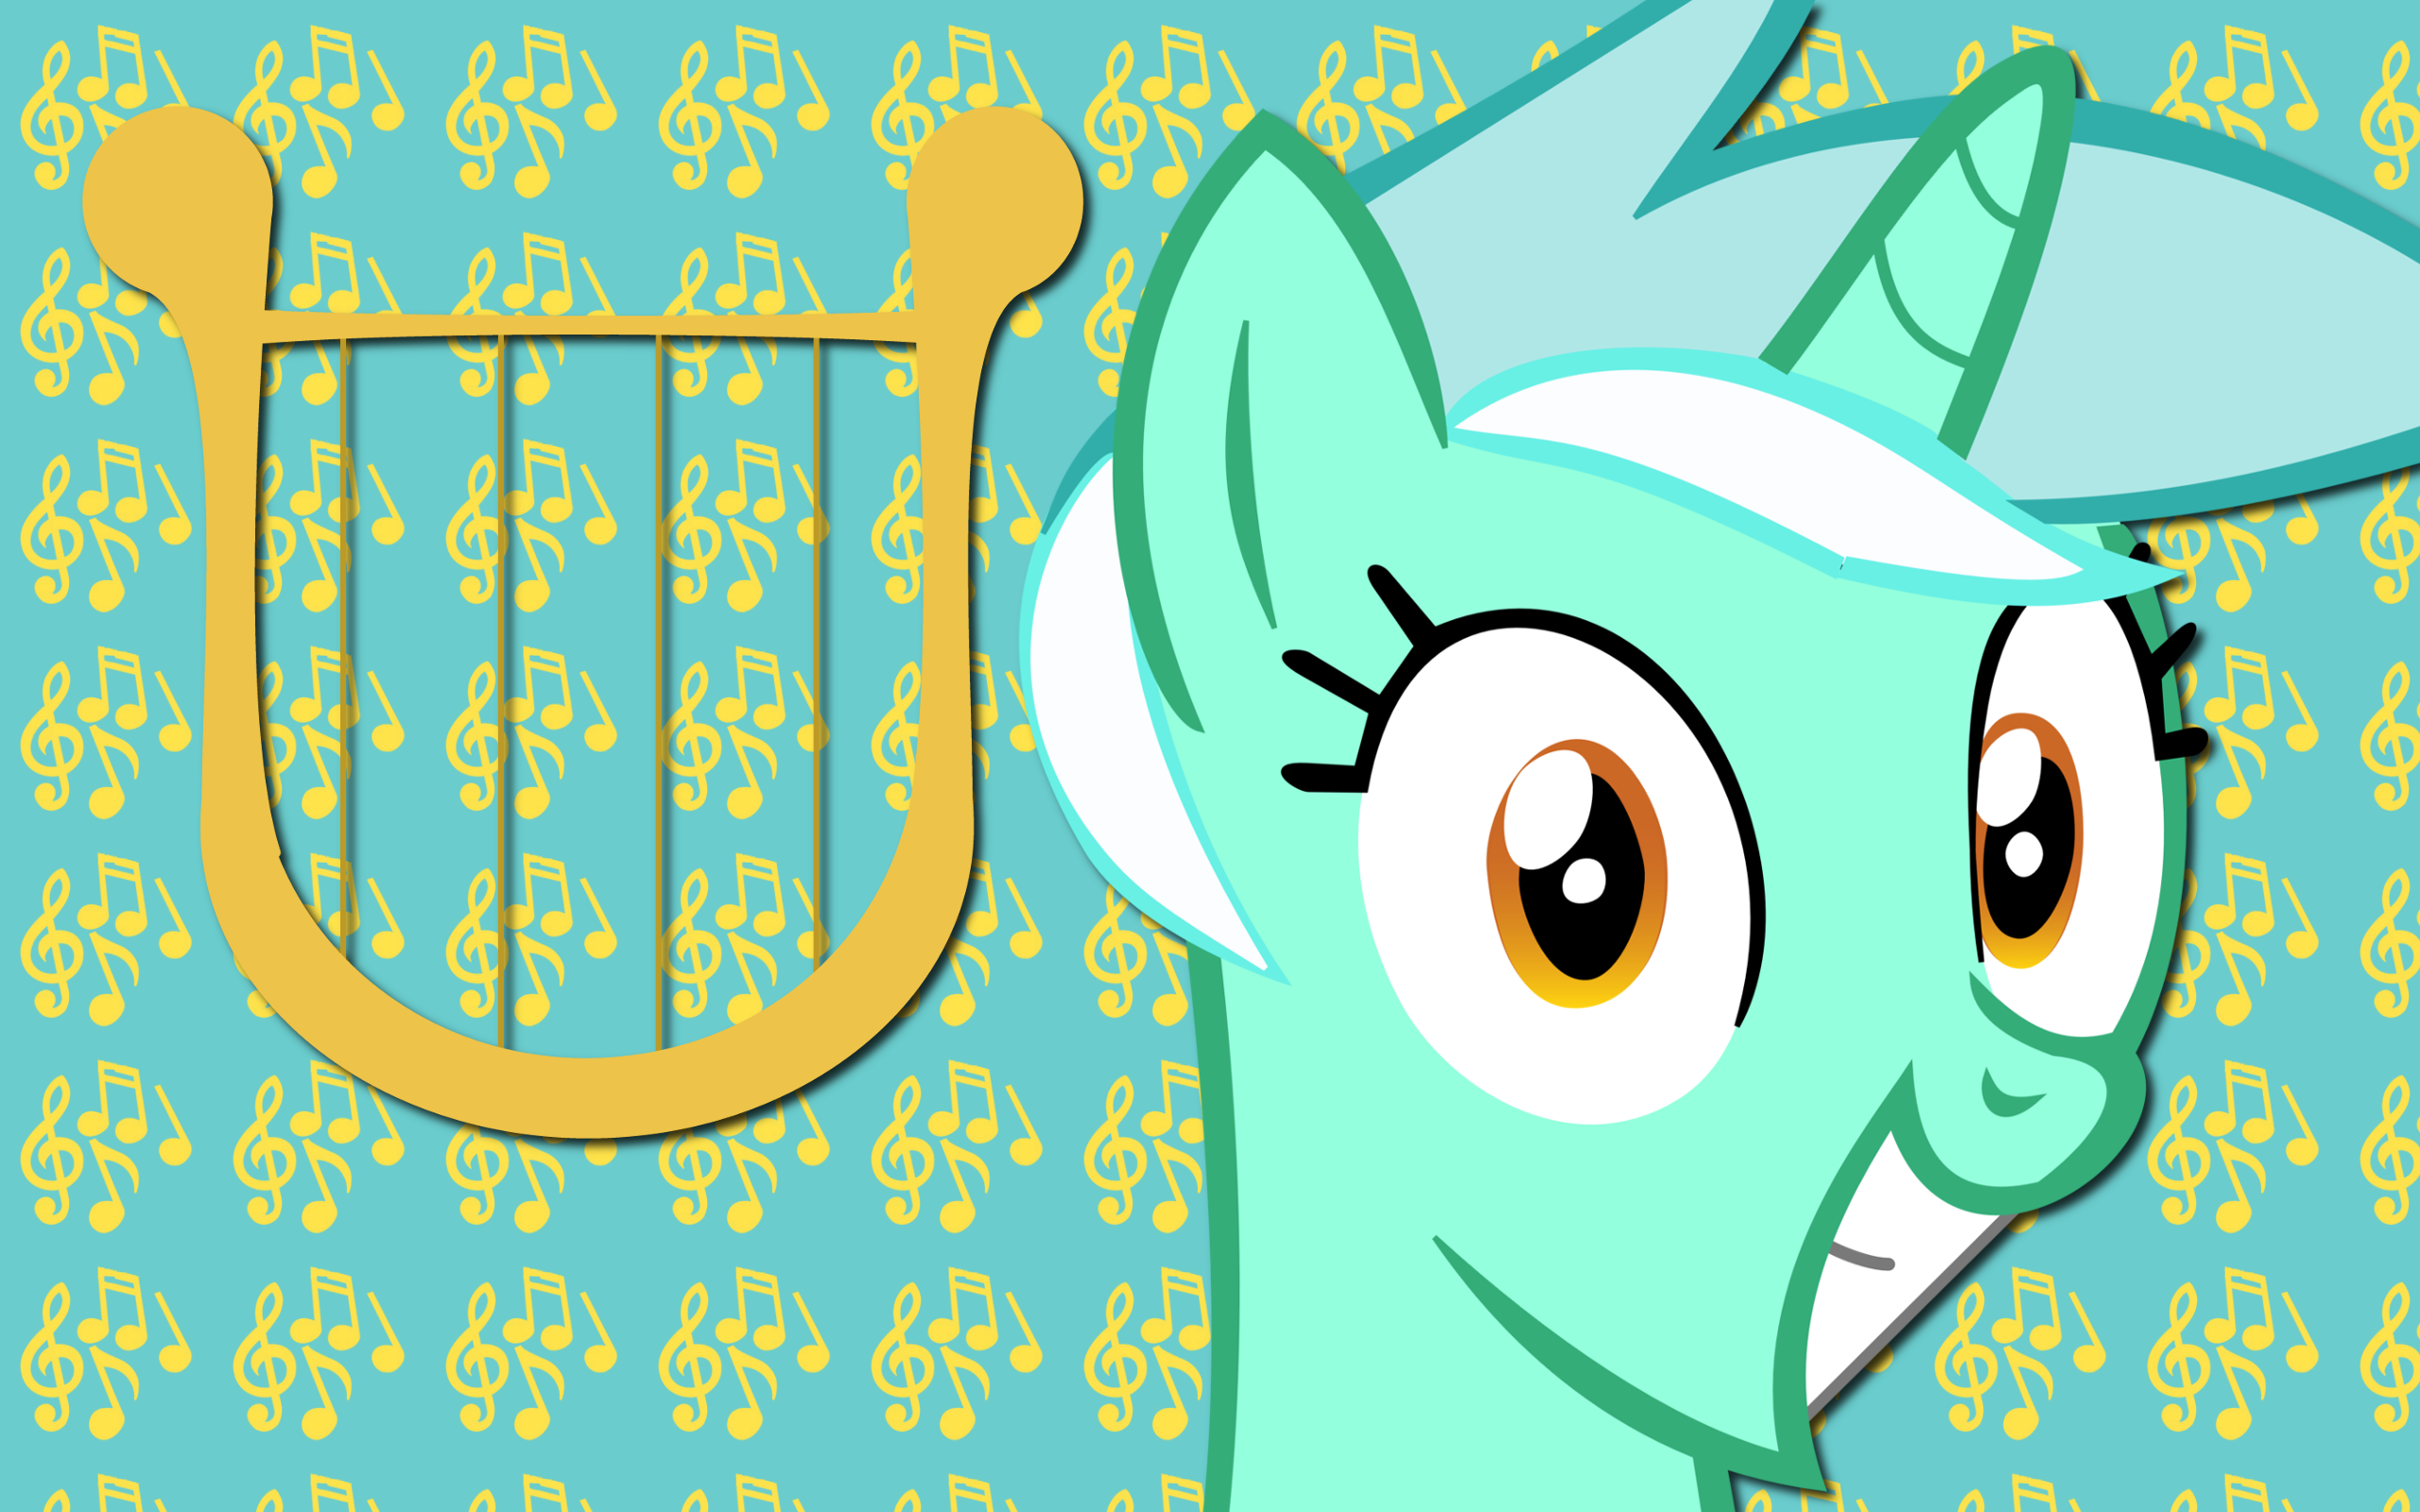 Lyra wallpaper 2 by AliceHumanSacrifice0, ooklah and Triox404